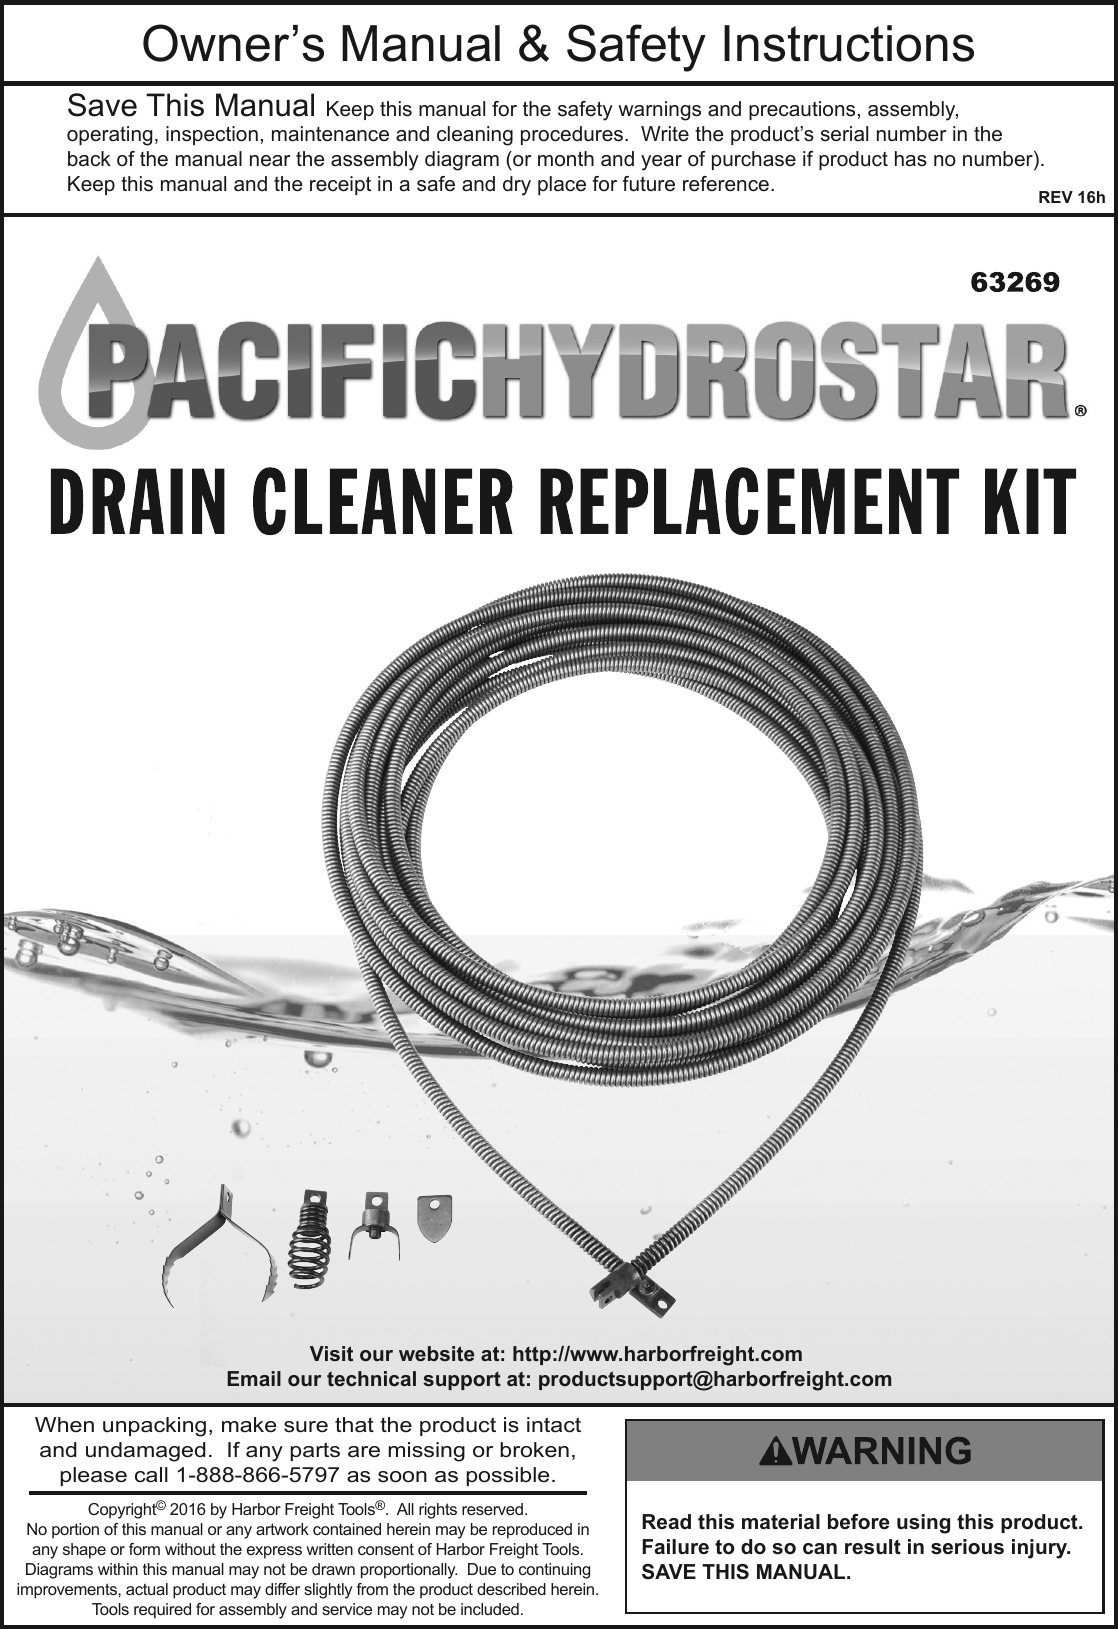 Page 1 of 4 - Manual For The 63269 Drain Cleaner Replacement Cable And Cutter Set